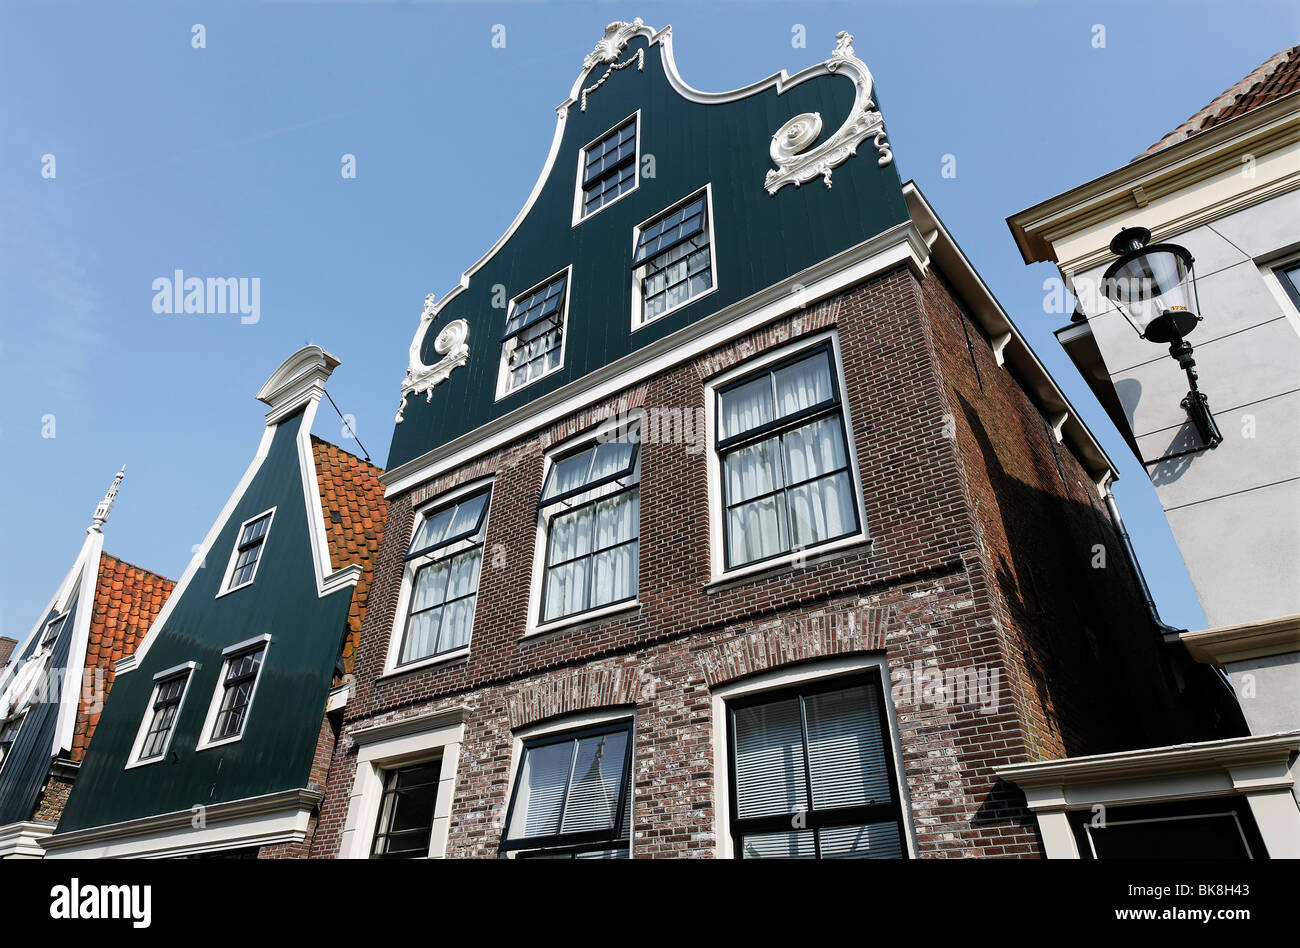 Houses from the 17th century, historic city De Rijp near Alkmaar, Province of North Holland, Netherlands, Europe Stock Photo